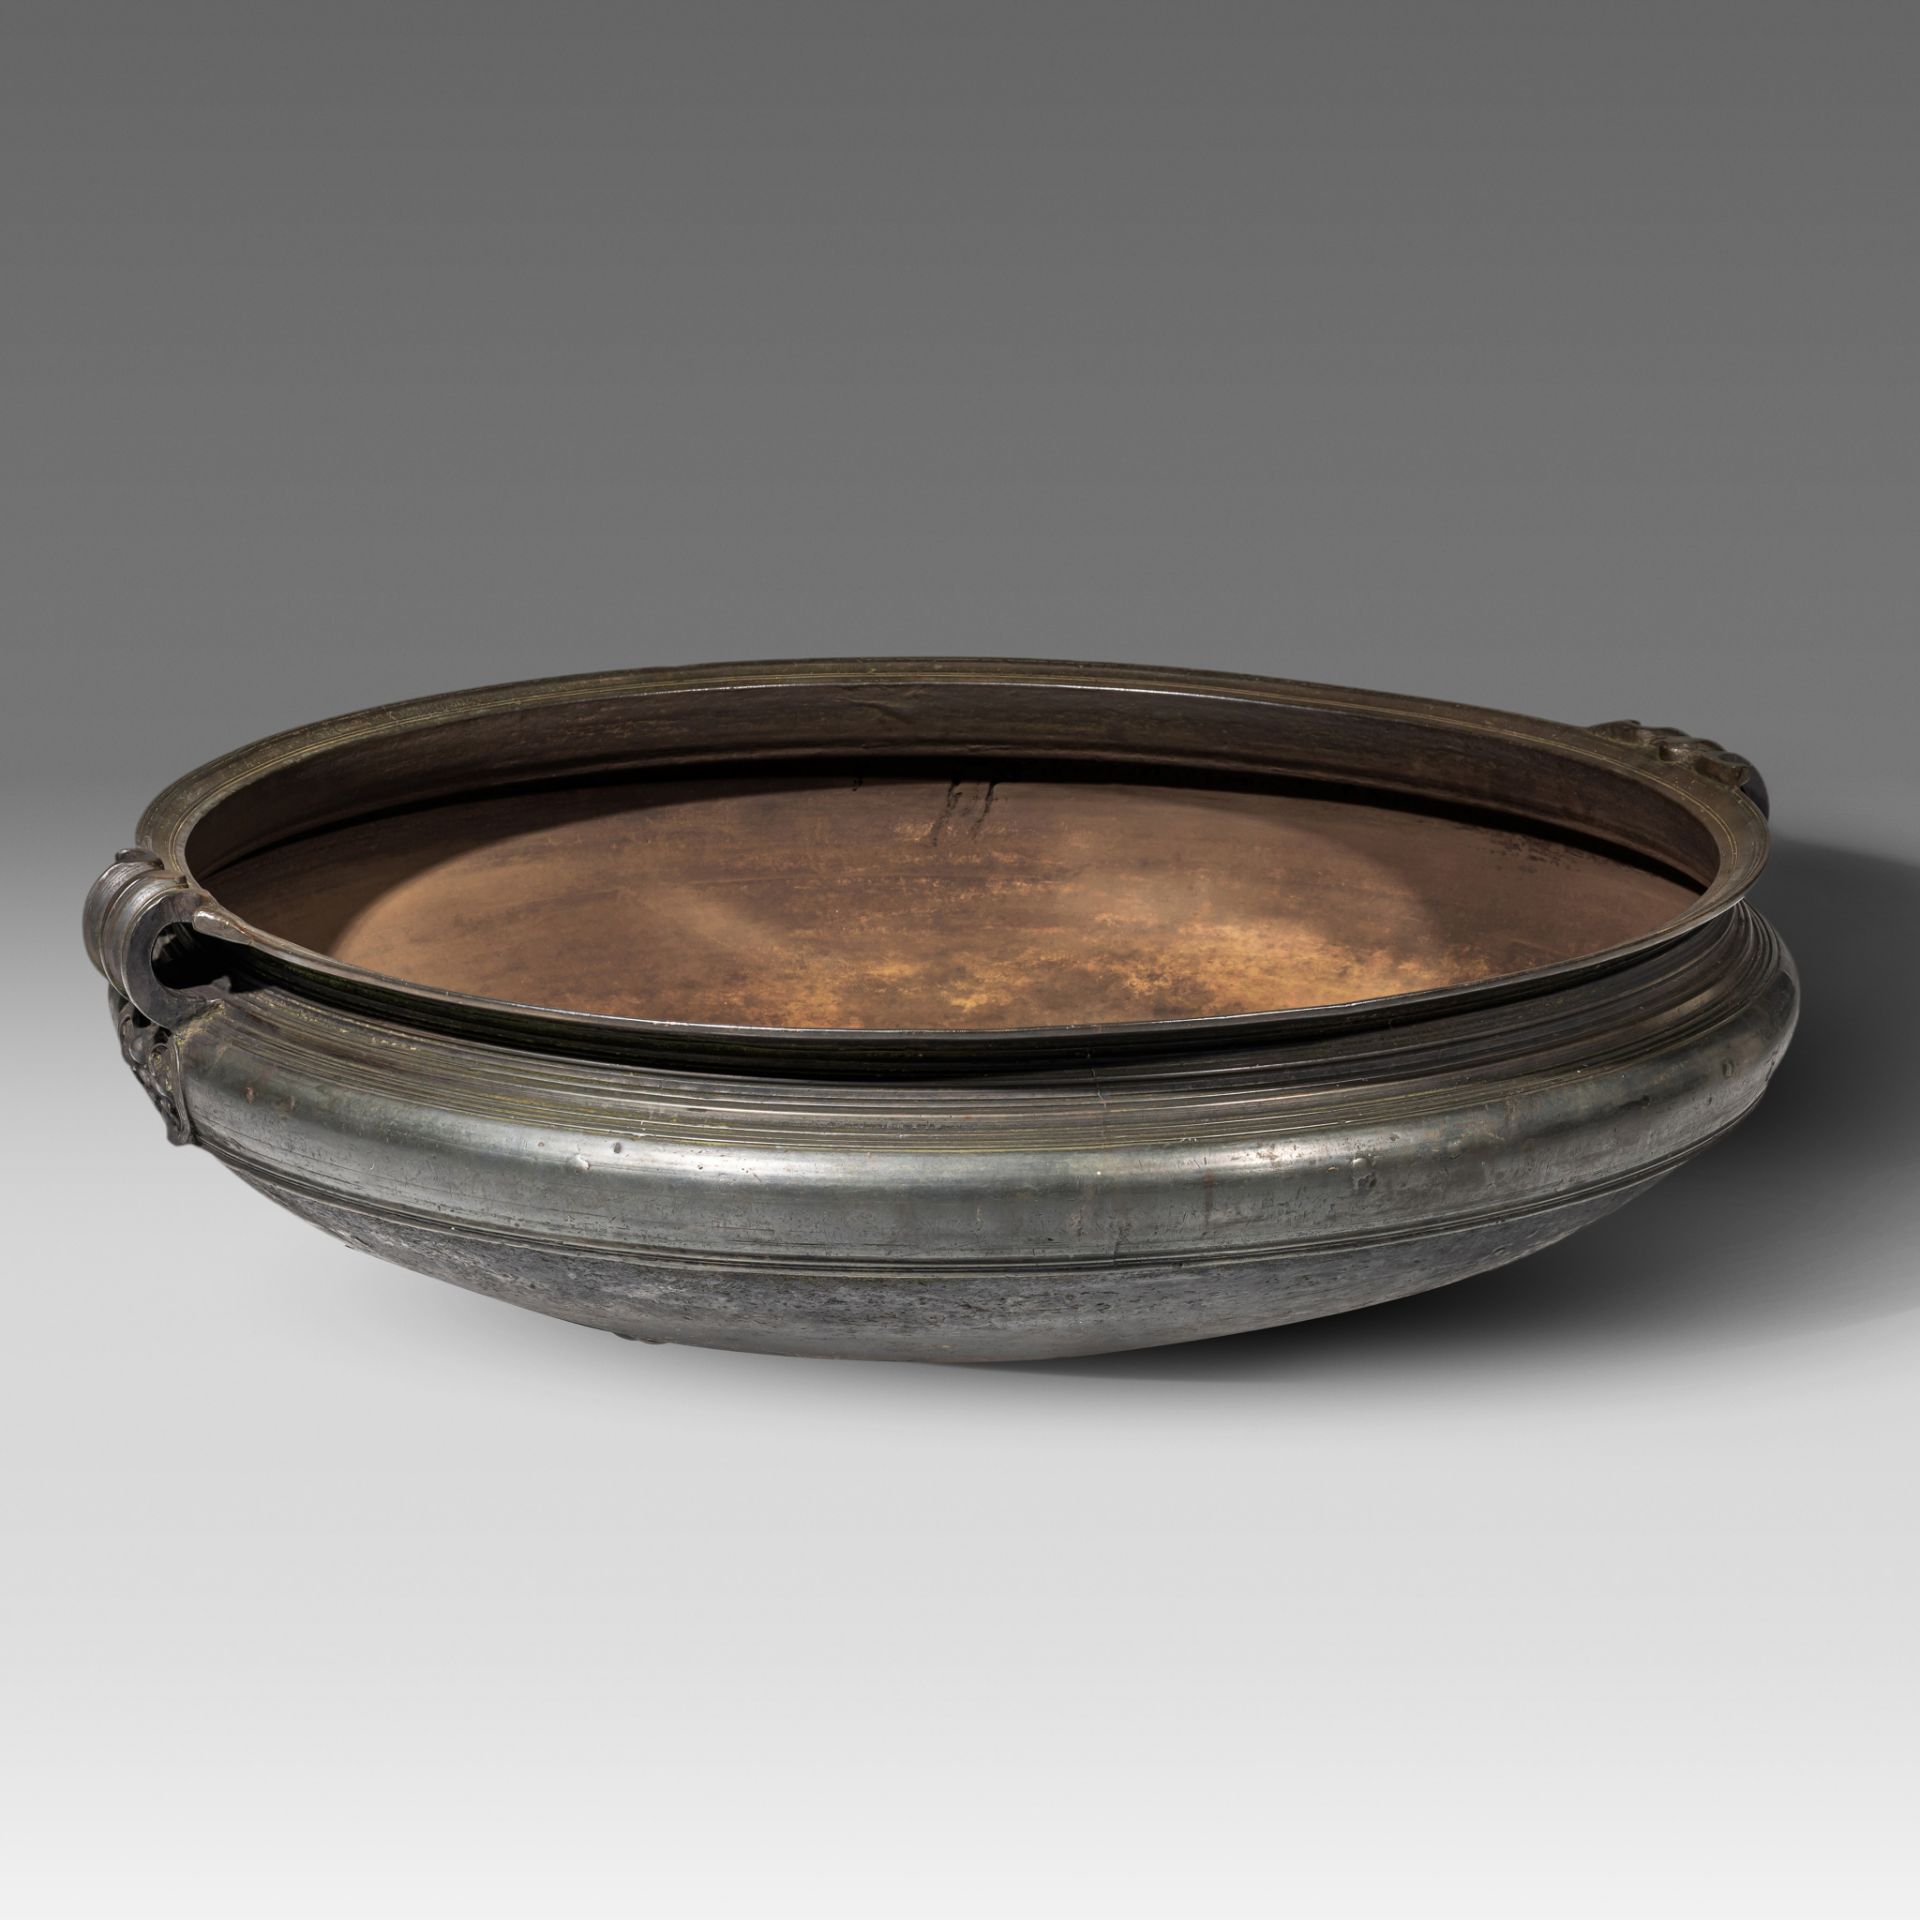 A large Indian bronze temple bowl, late 19thC, dia 103 cm - Image 6 of 7